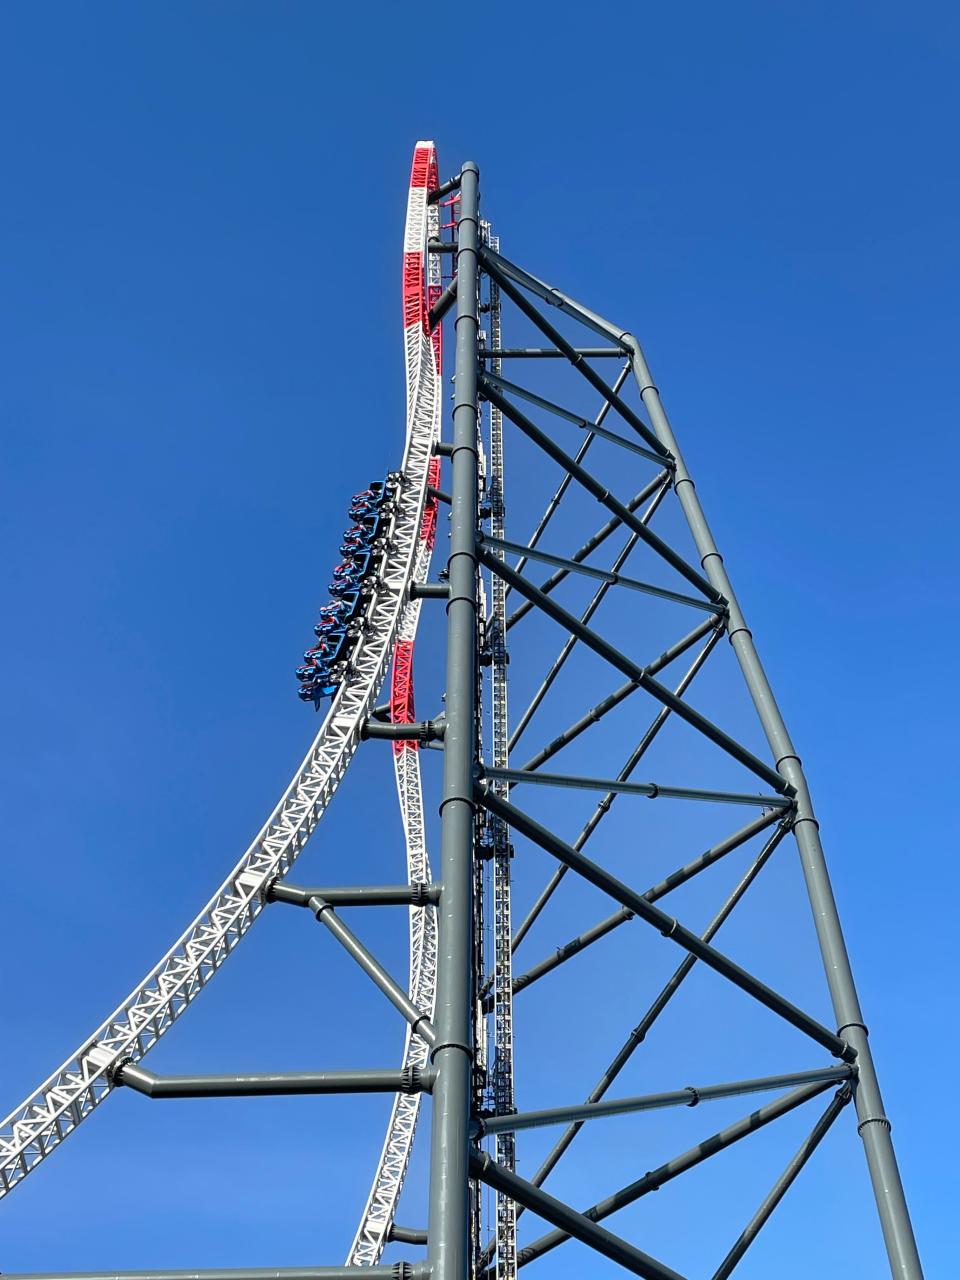 Riders on Cedar Point's Top Thrill 2 coaster make their way up the 420-foot-tall tower.